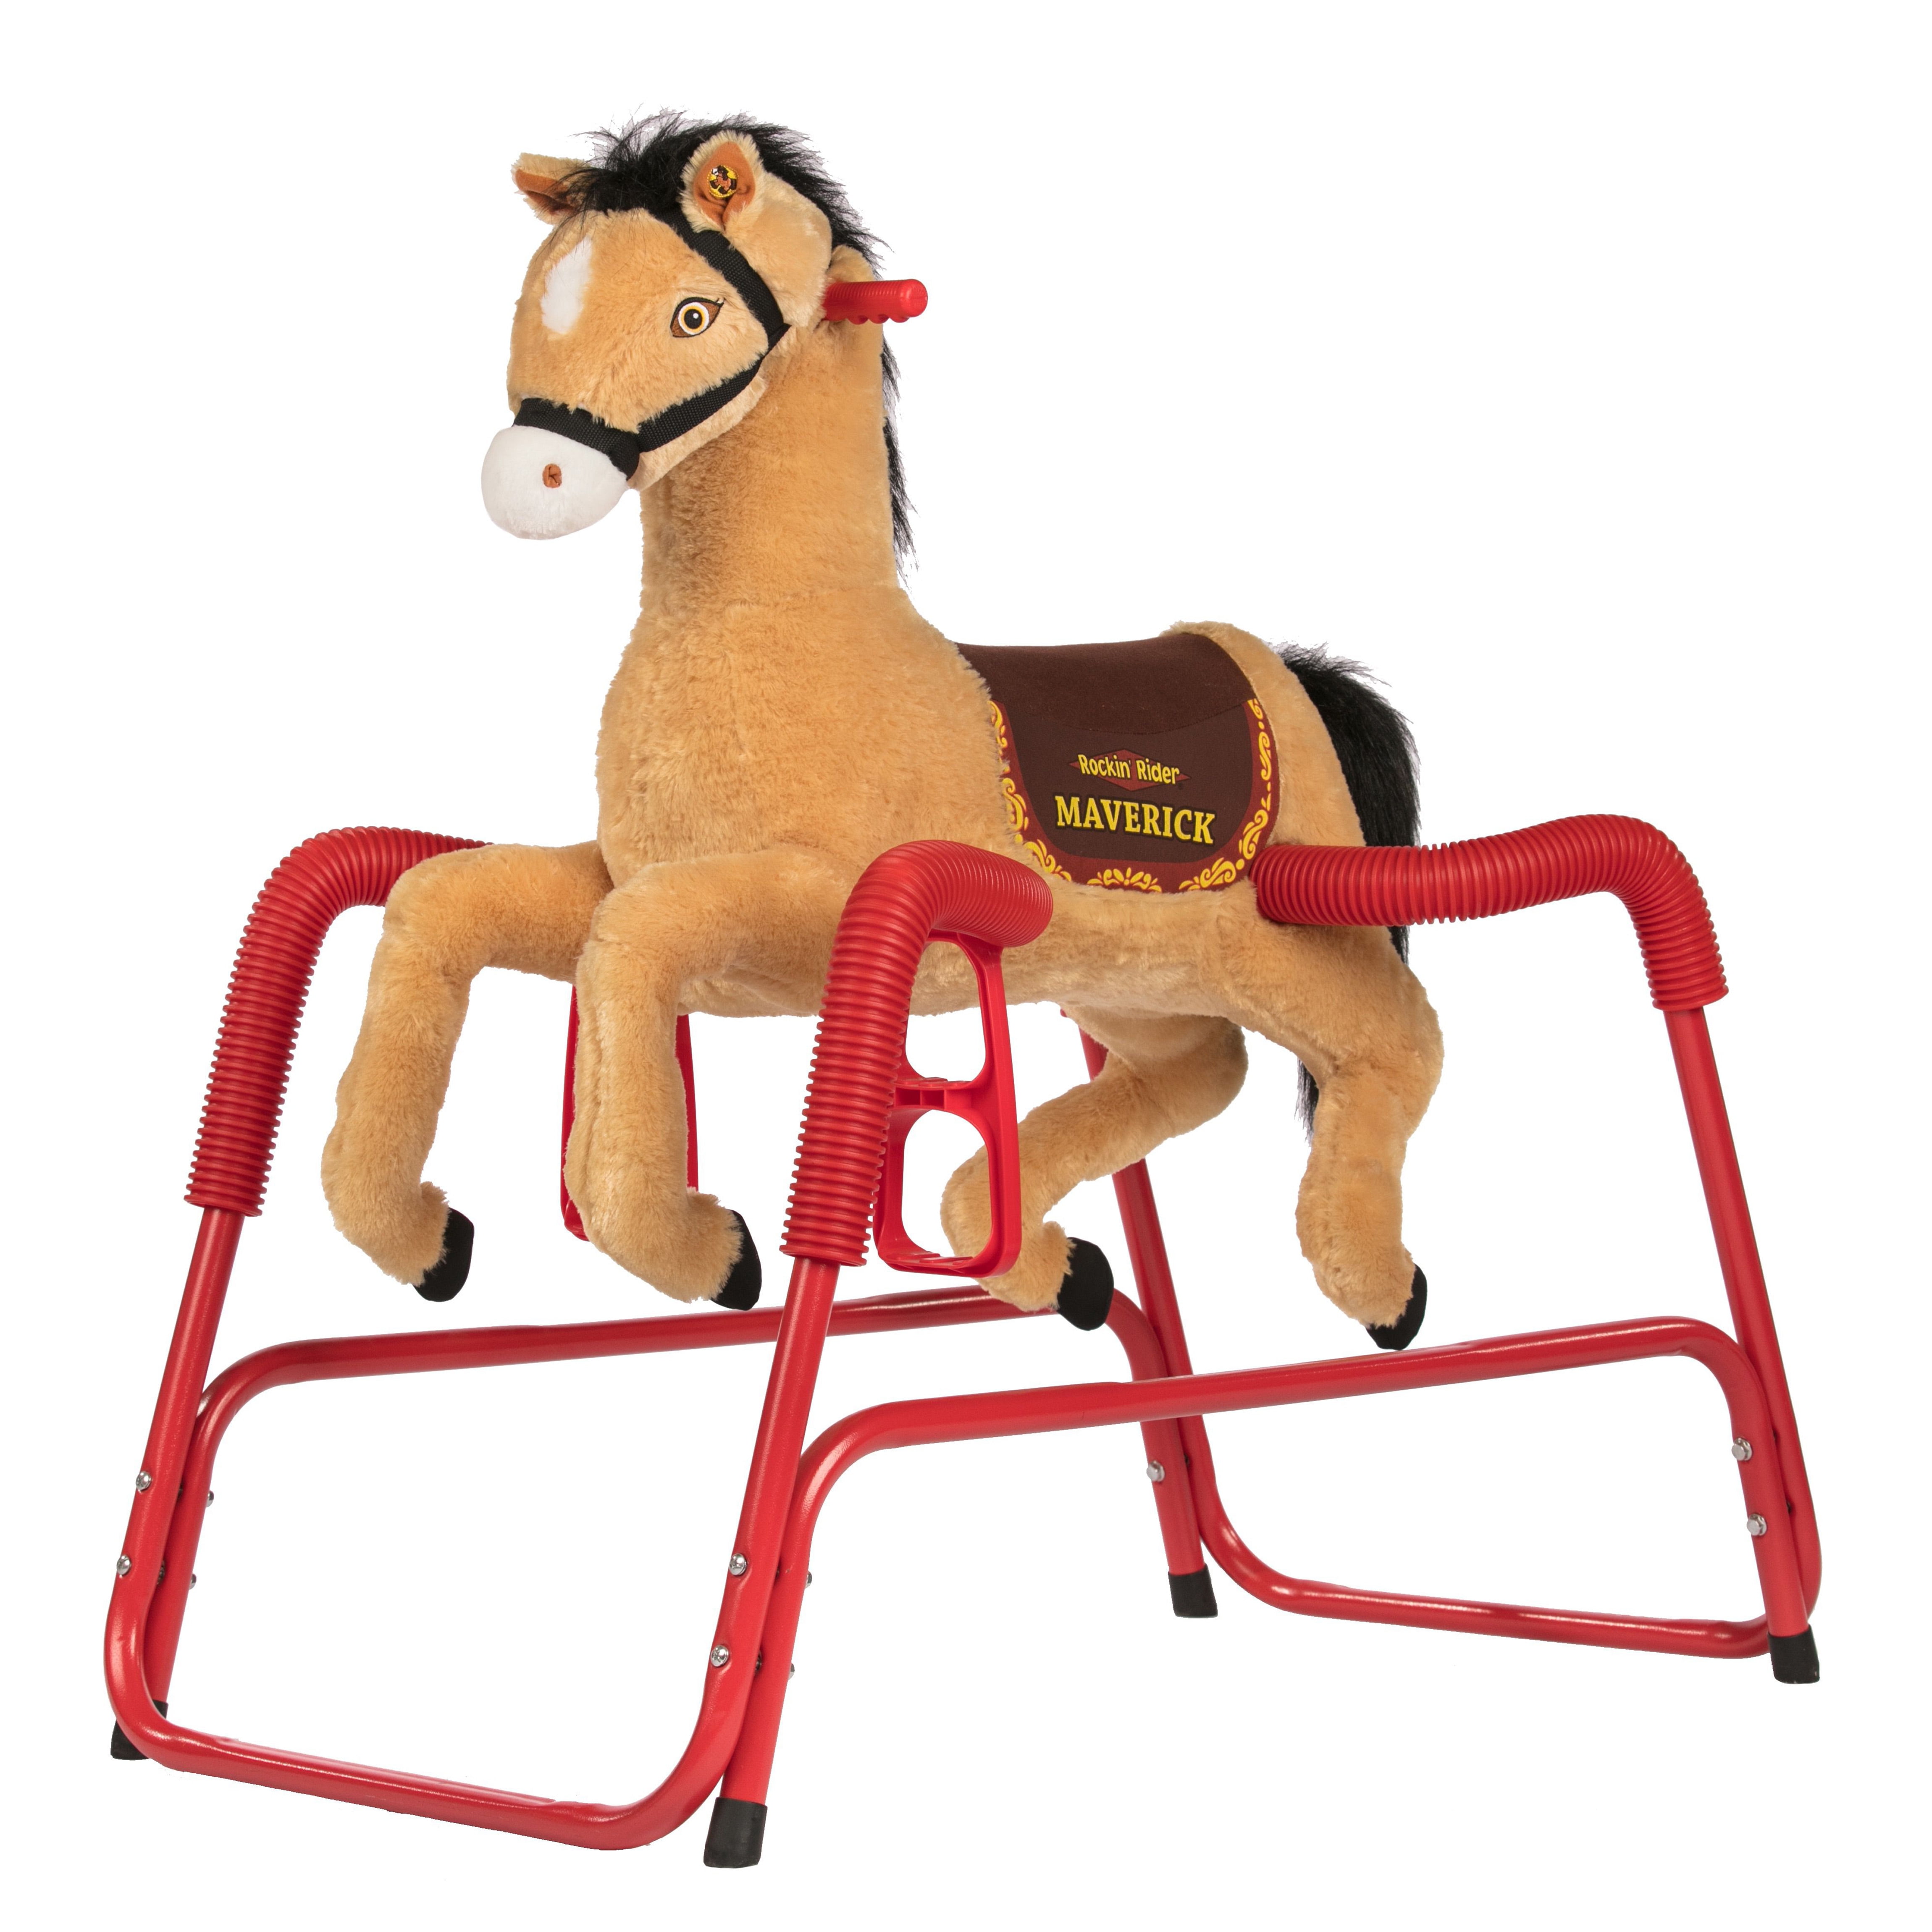 walks,gallops,neighs.batteries incl' NEW Large 14" tall interactive Pony/horse 